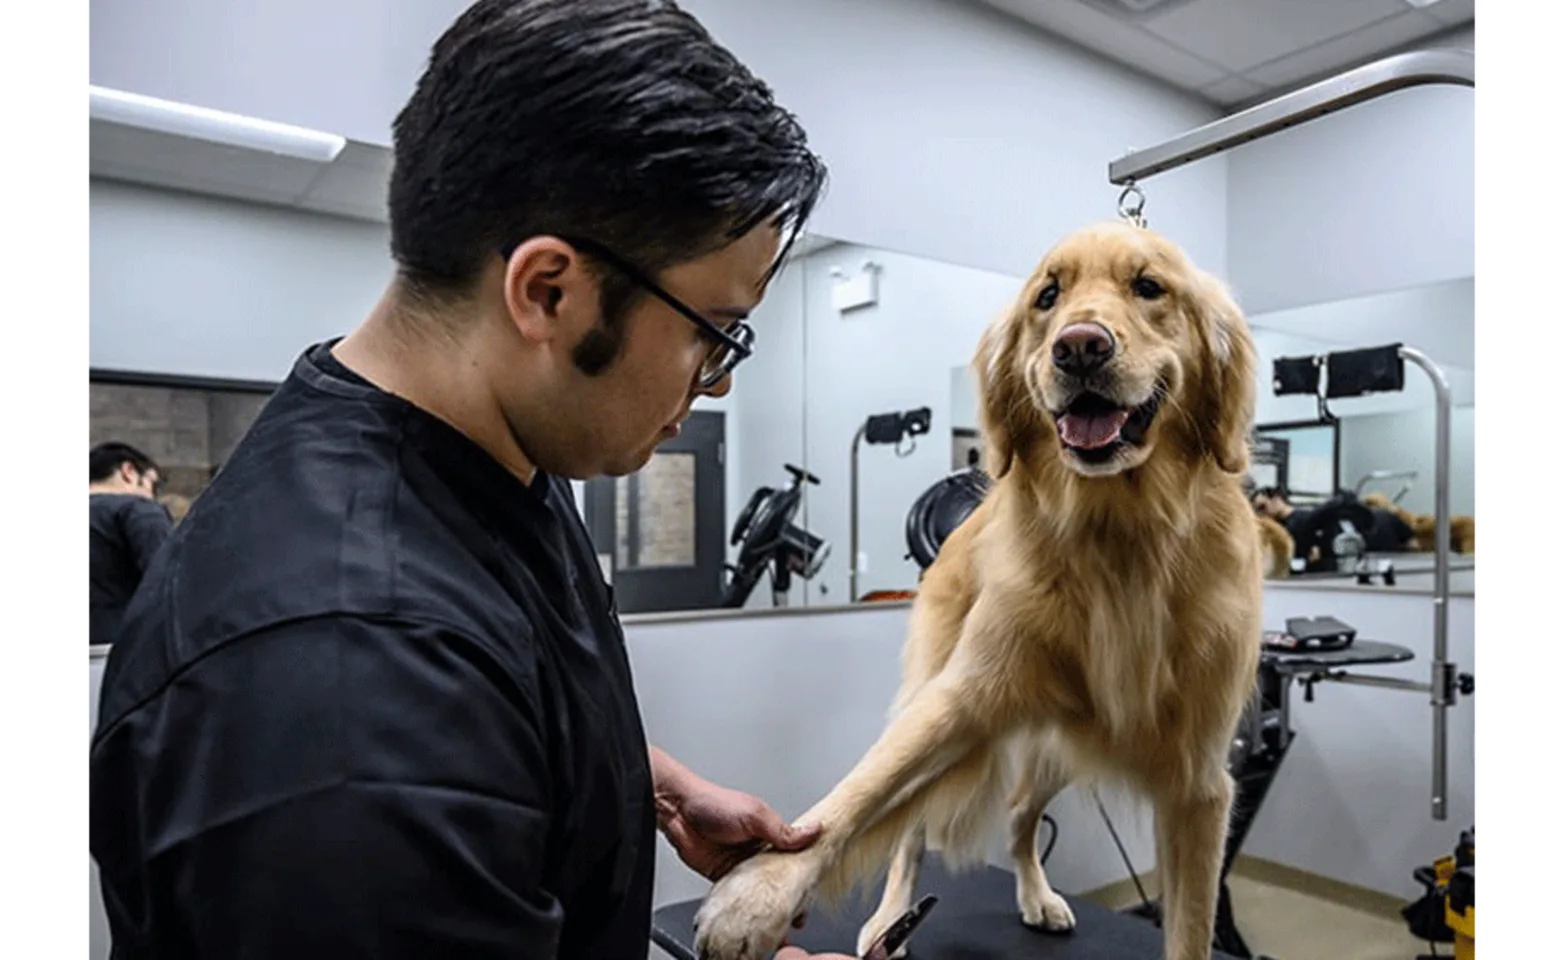 Staff trimming the nails of a golden retriever